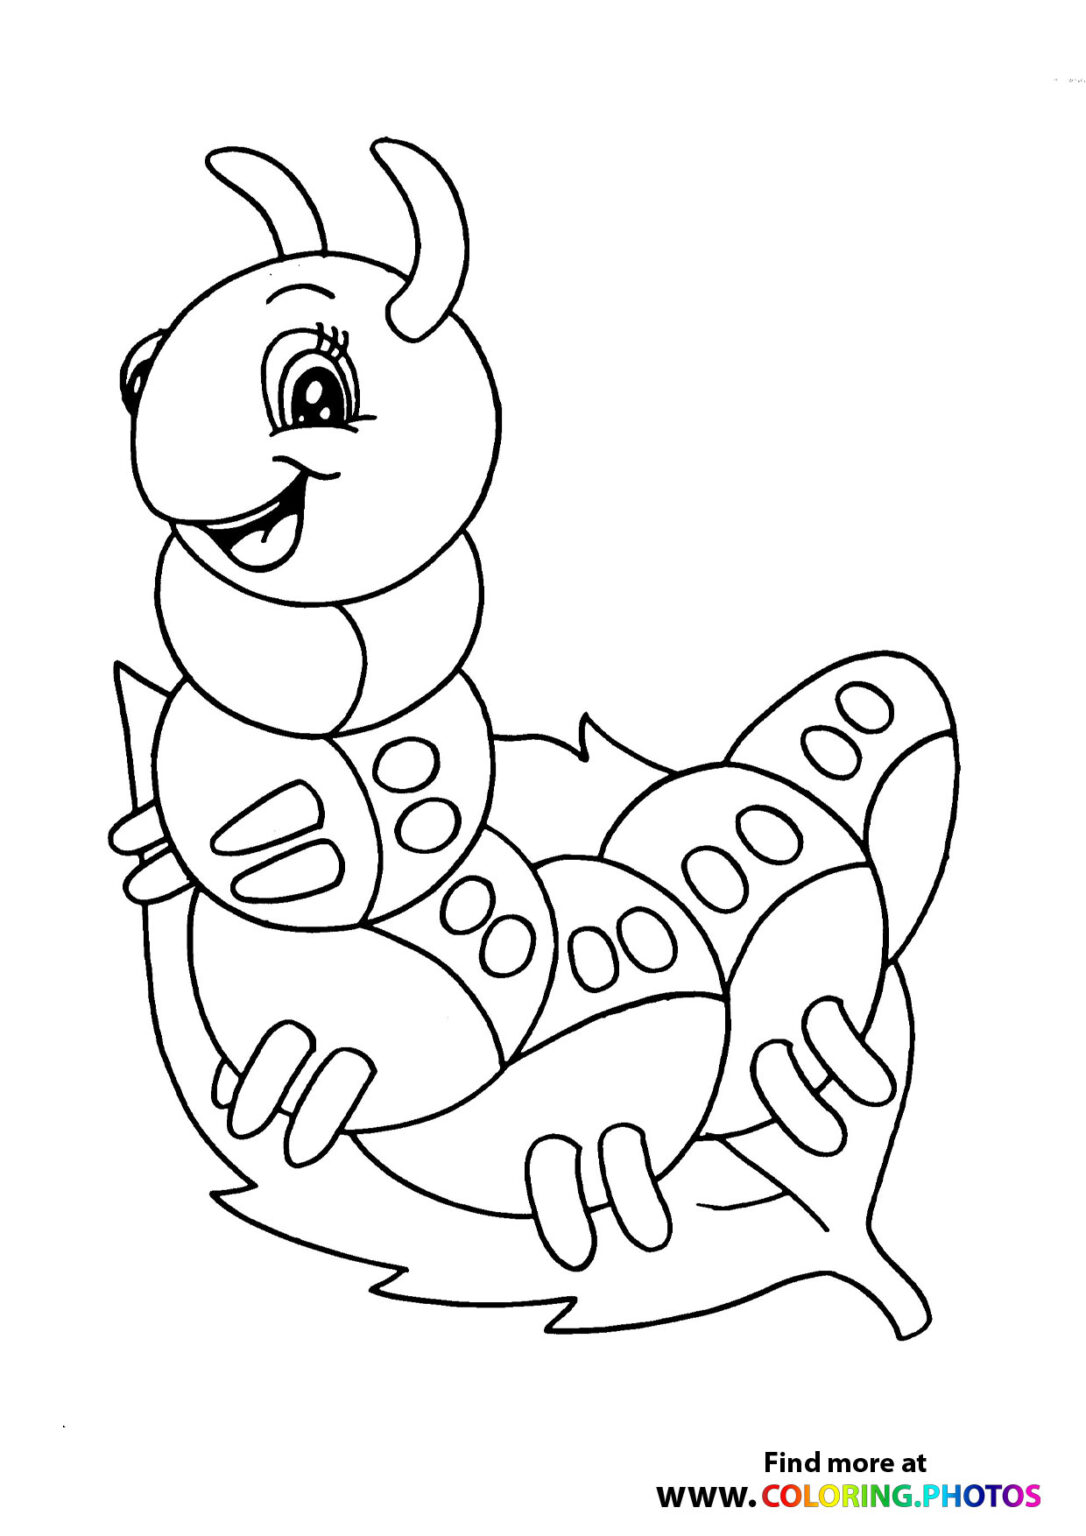 Cat eating ice-cream - Coloring Pages for kids